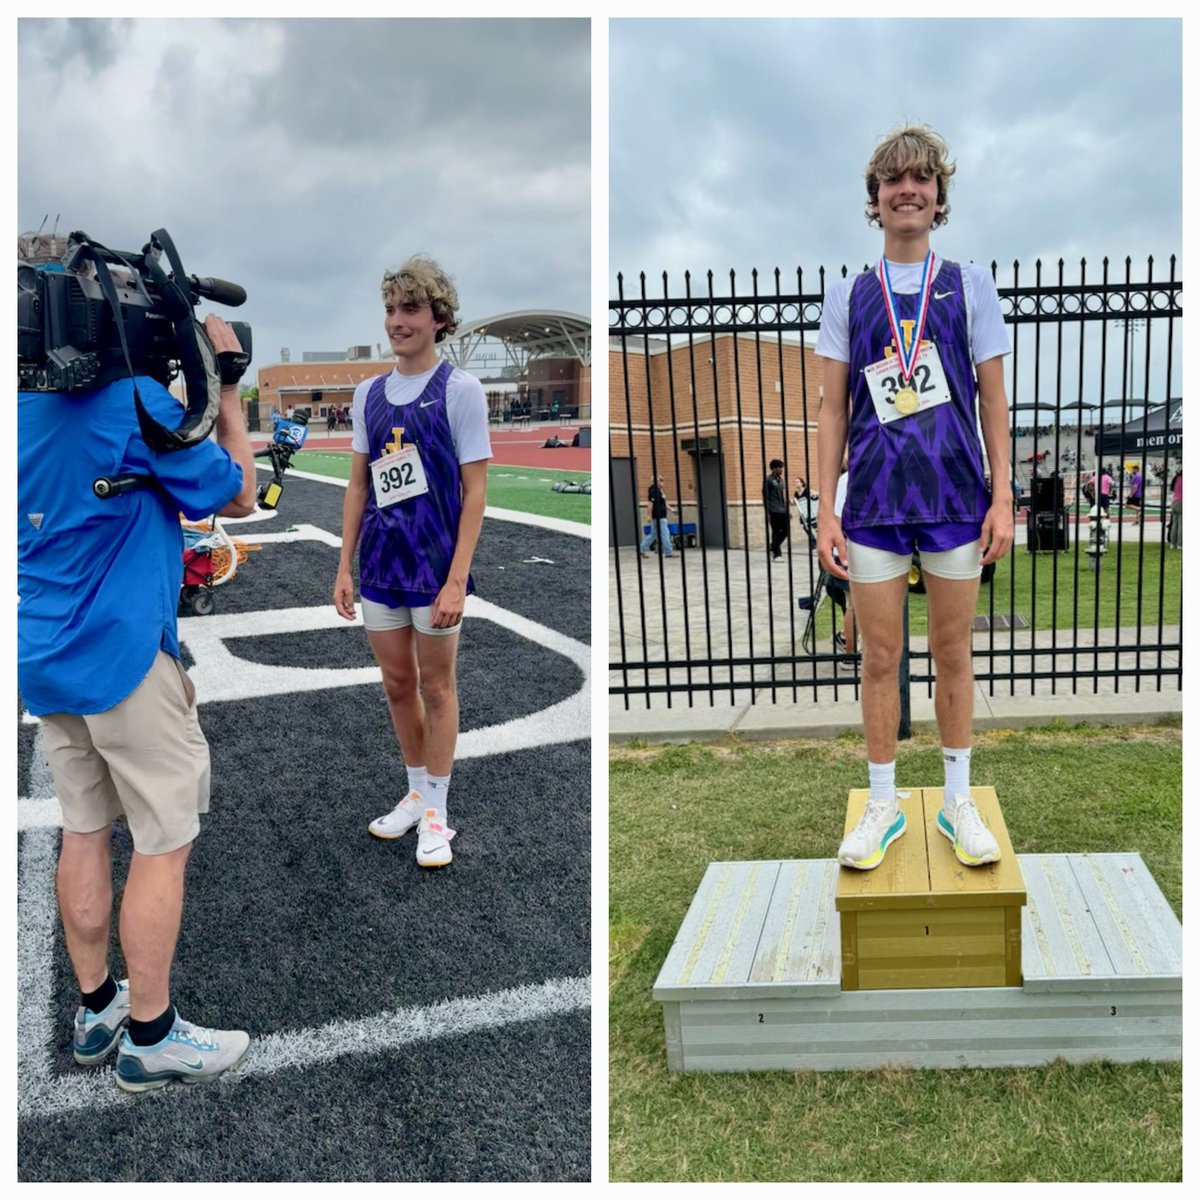 Check out this state bound @JerseyVillageHS Falcon! Landon took 1st at the Regional Track Meet by setting a new school record with a jump of 6'10'. @jvfalconsath @CFISDAthletics